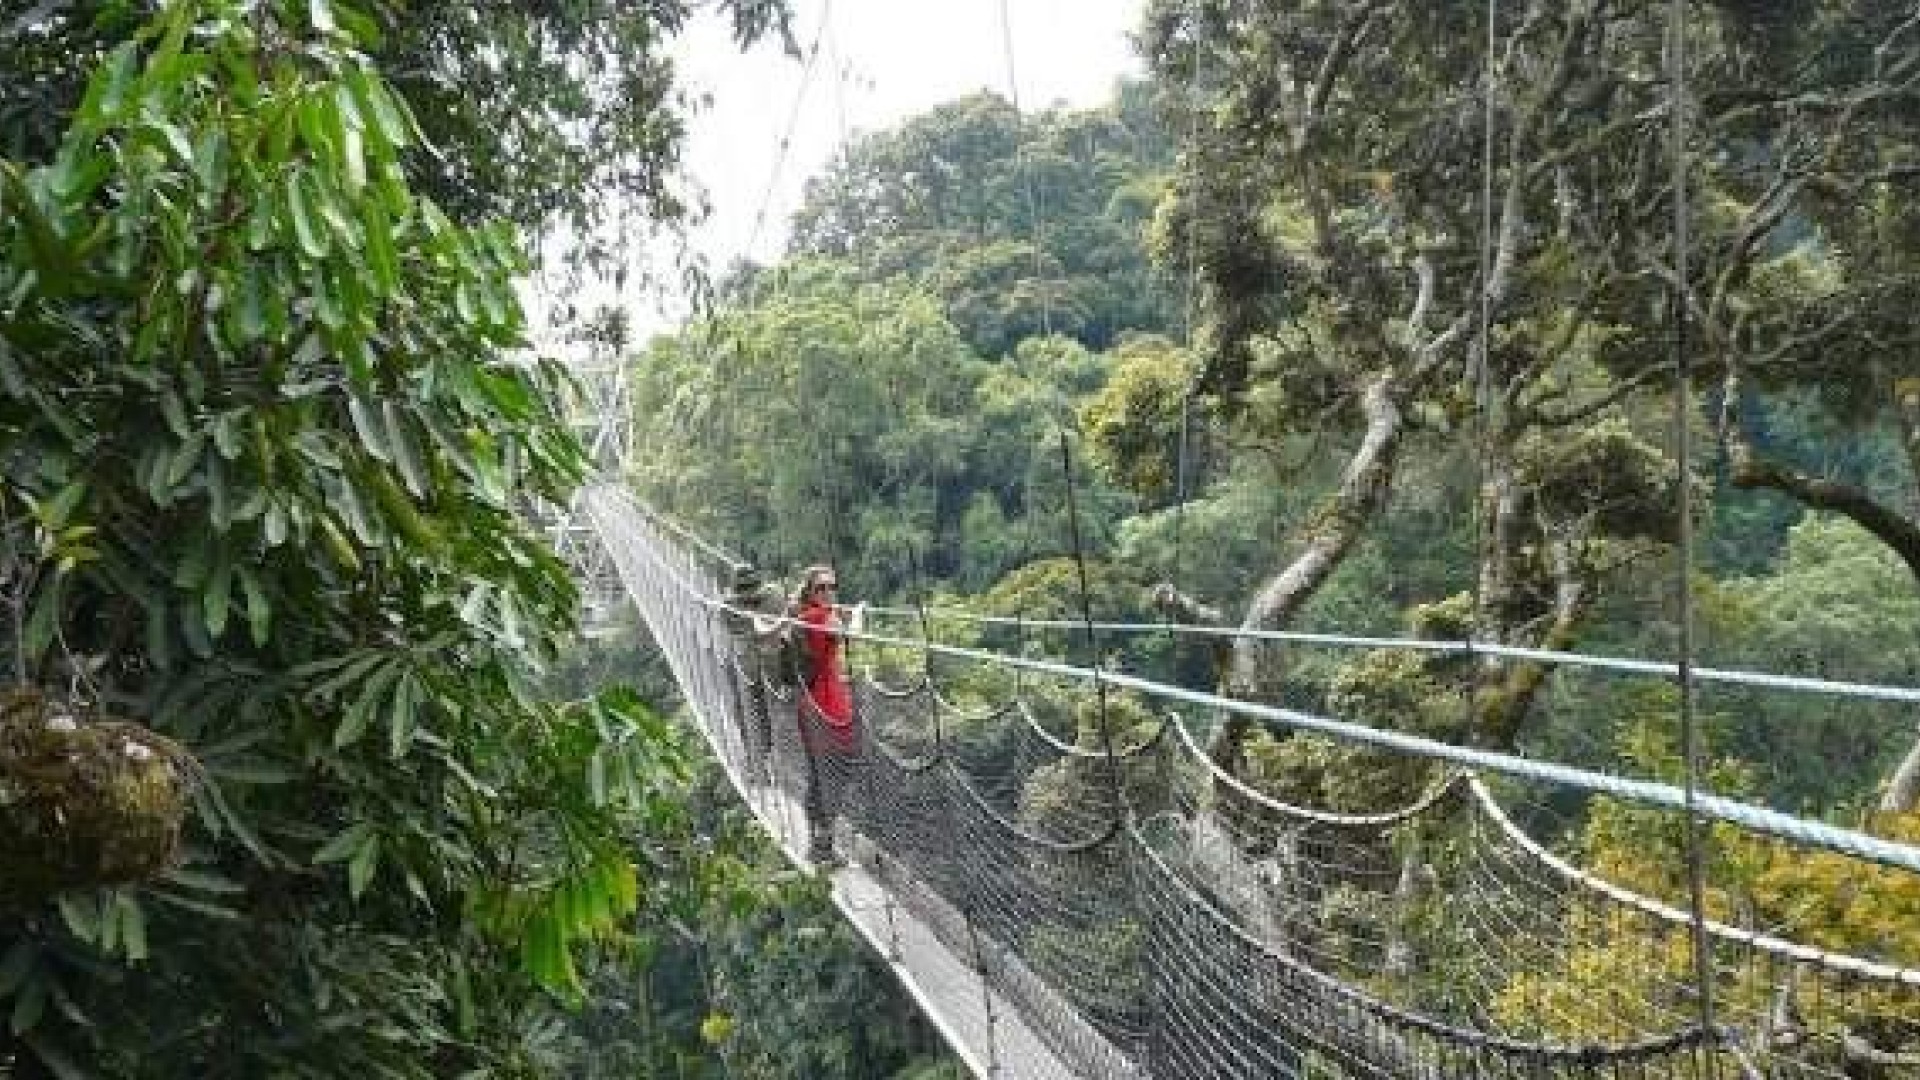 People walking across a hanging bridge in a lush forest to see gorillas in Rwanda, Africa